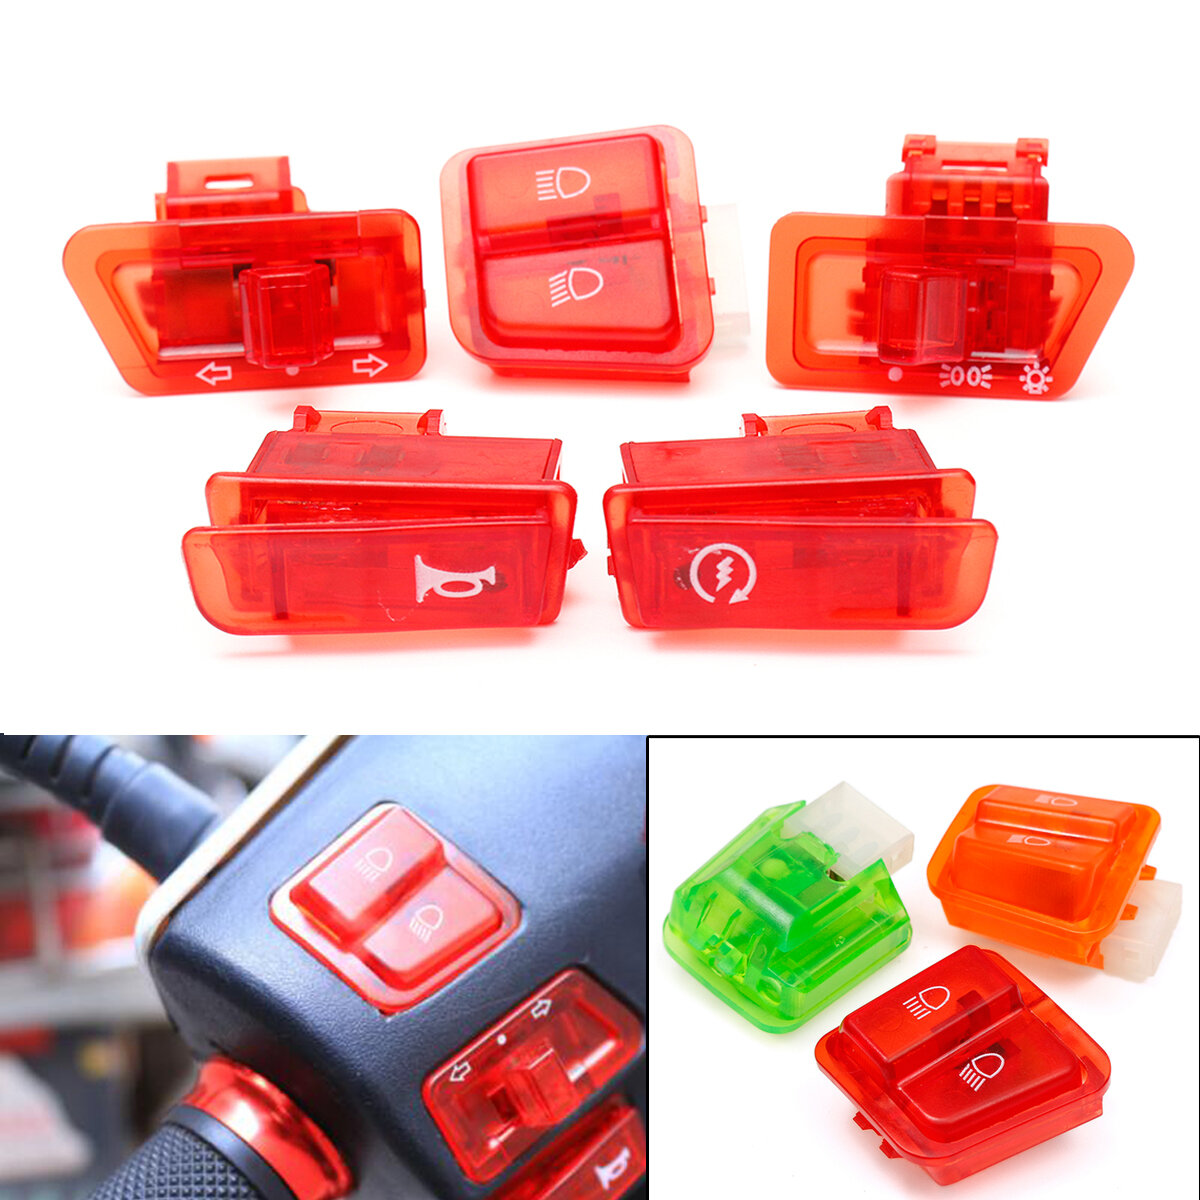 Turn Signal Head Light Horn Dimmer Starter DIY Switch Button For GY6 50cc 125cc 150cc Moped Scooter